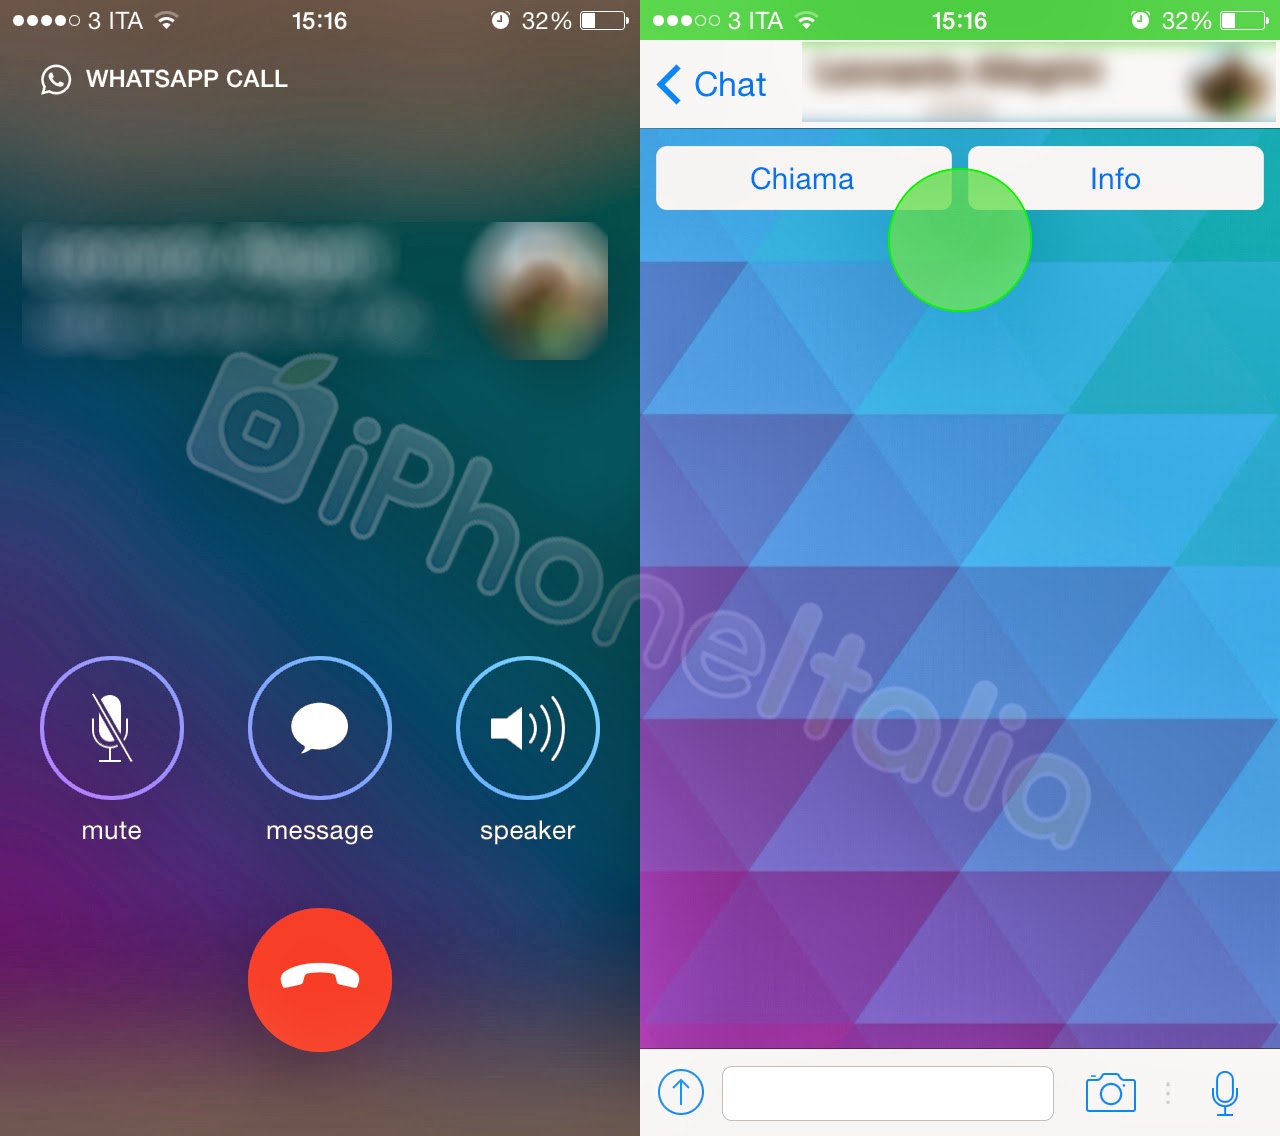 Leaked Screenshots Show WhatsApp Upcoming VoIP Feature